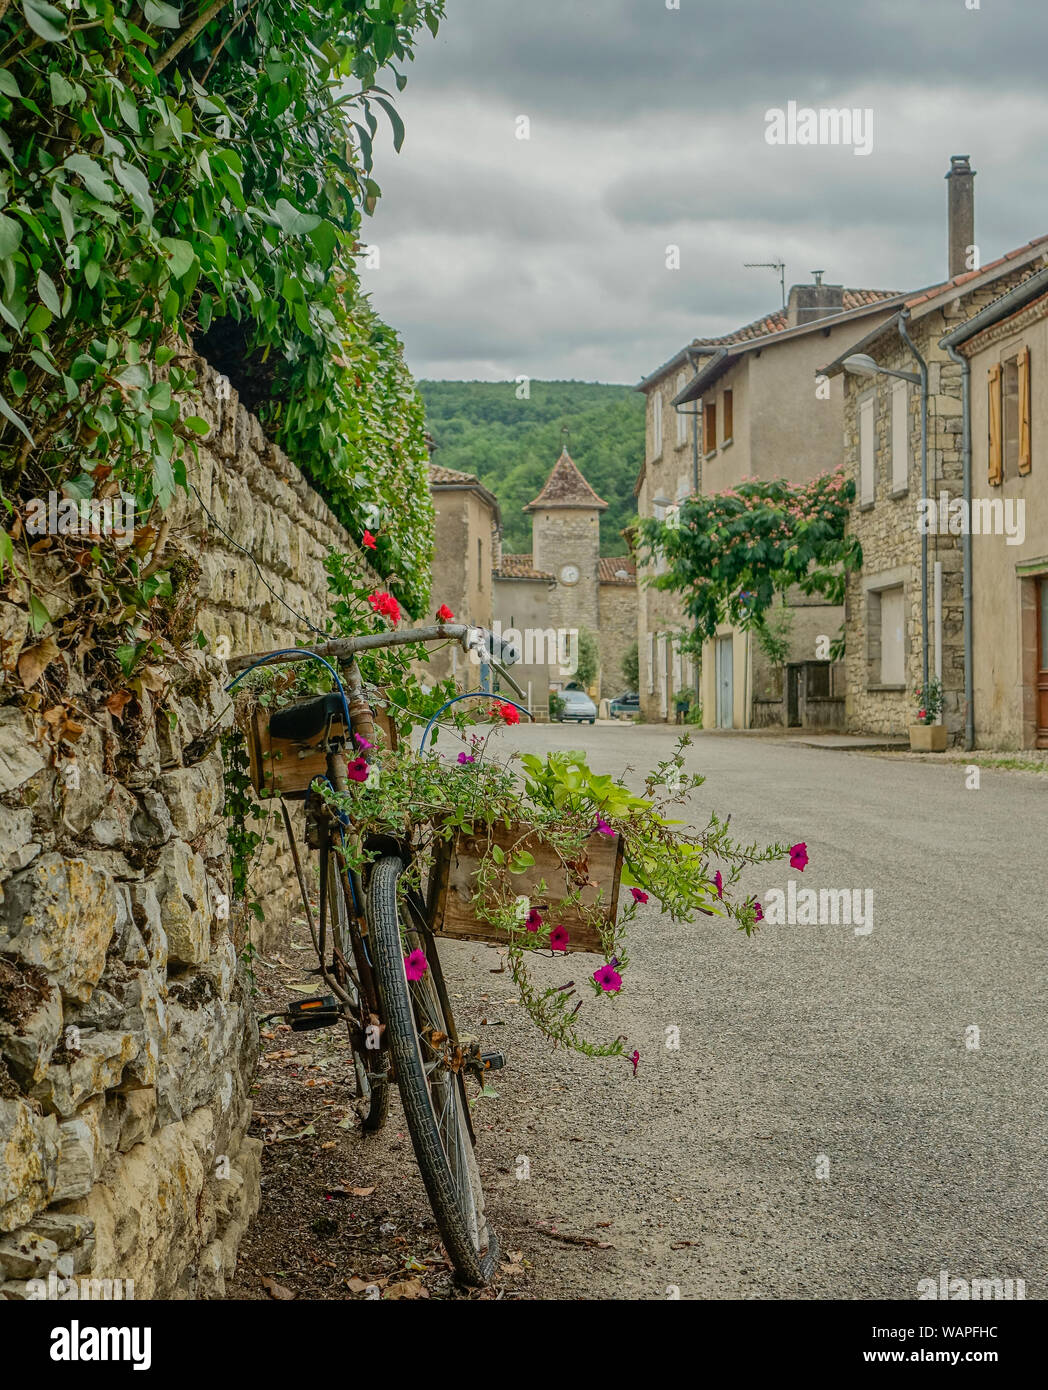 Feneyrols, Midi Pyrenees, France - July 23, 2017: Front view of an old bicycle decorated with flowers with a bell tower at the bottom of the street Stock Photo